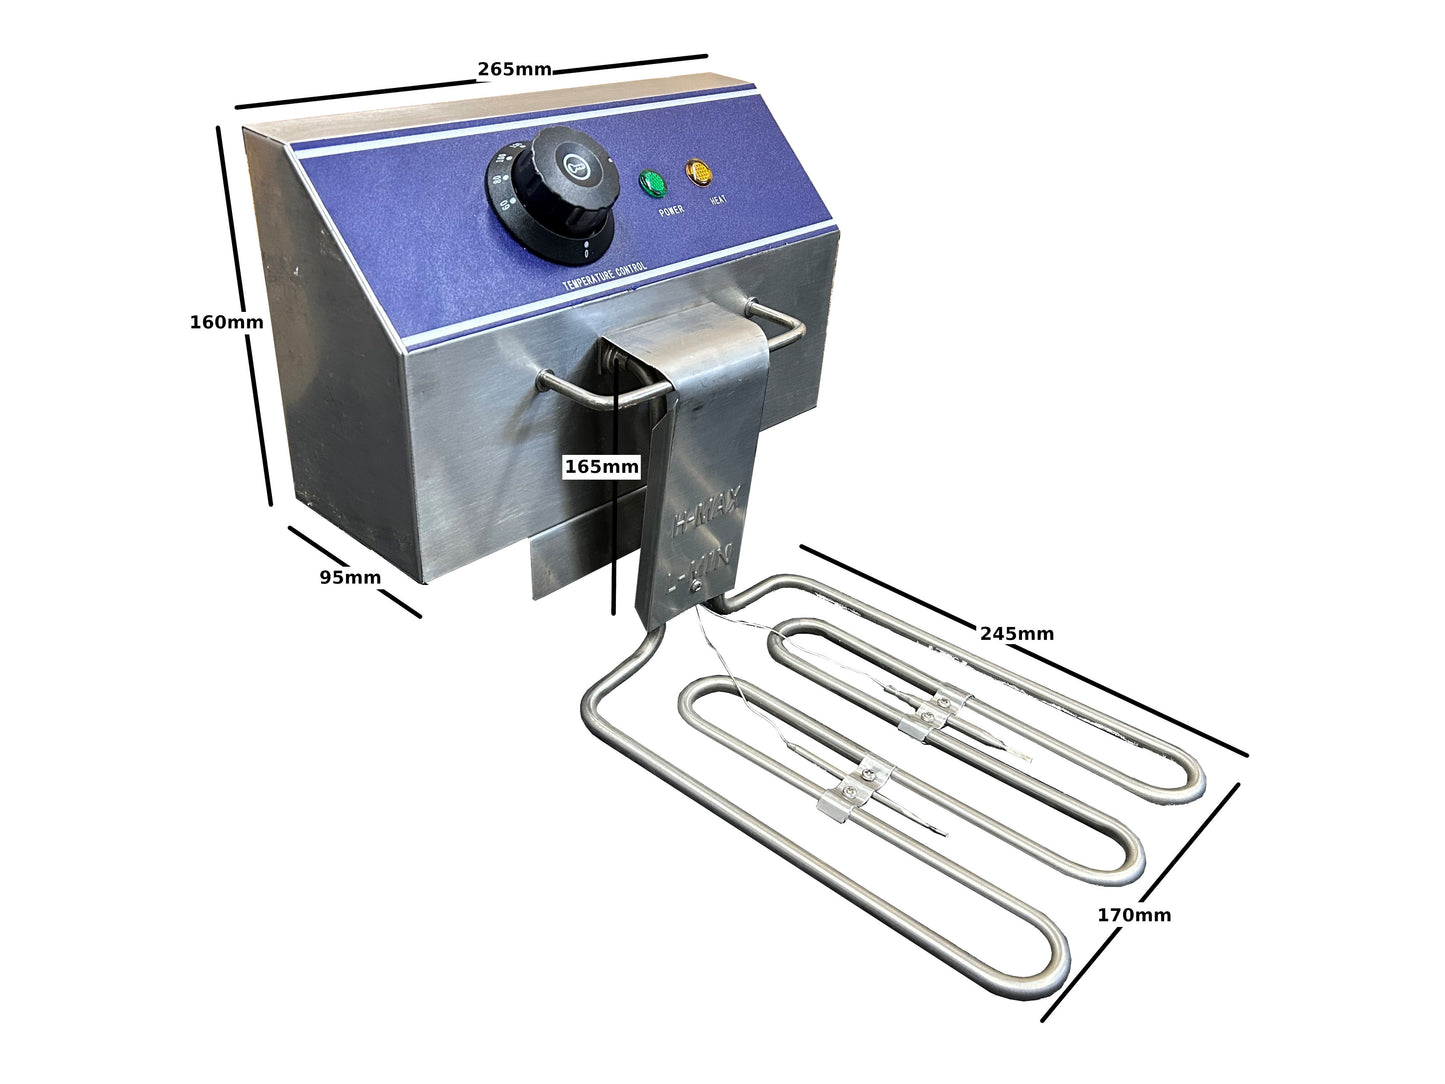 Replacement 2.5kw Fryer Head for 6L Commercial Deep Fat Fryer